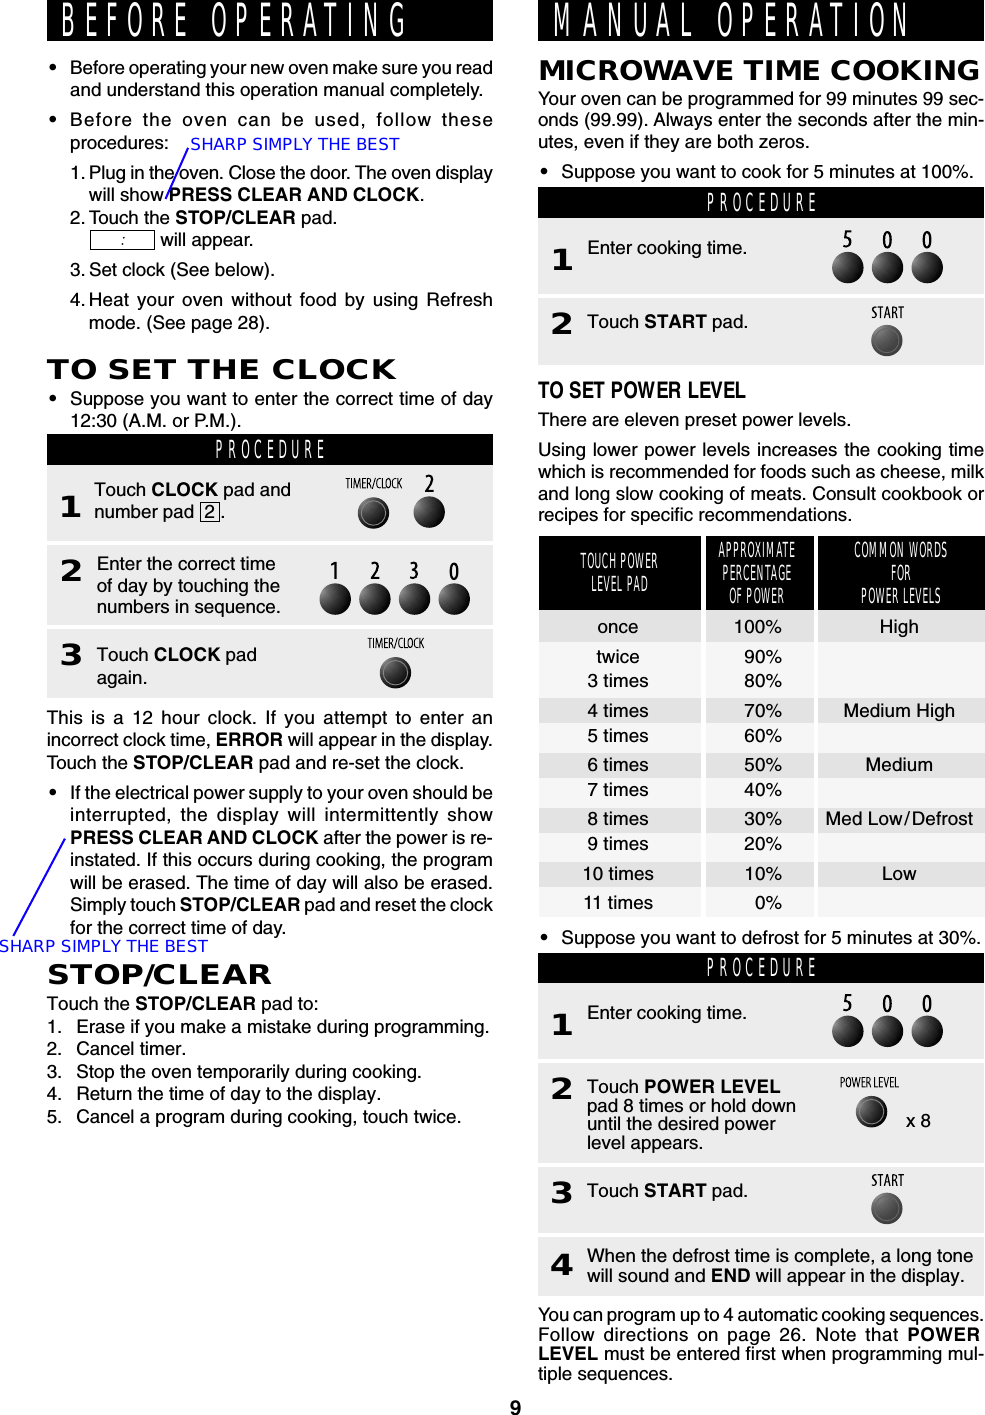 9MANUAL OPERATION•Before operating your new oven make sure you readand understand this operation manual completely.•Before the oven can be used, follow theseprocedures:1. Plug in the oven. Close the door. The oven displaywill show PRESS CLEAR AND CLOCK.2. Touch the STOP/CLEAR pad.    will appear.3. Set clock (See below).4. Heat your oven without food by using Refreshmode. (See page 28).BEFORE OPERATINGYour oven can be programmed for 99 minutes 99 sec-onds (99.99). Always enter the seconds after the min-utes, even if they are both zeros.•Suppose you want to cook for 5 minutes at 100%.MICROWAVE TIME COOKING•Suppose you want to defrost for 5 minutes at 30%.TO SET POWER LEVELThere are eleven preset power levels.Using lower power levels increases the cooking timewhich is recommended for foods such as cheese, milkand long slow cooking of meats. Consult cookbook orrecipes for specific recommendations.APPROXIMATEPERCENTAGEOF POWERCOMMON WORDSFORPOWER LEVELSTOUCH POWERLEVEL PADonce 100% Hightwice 90%3 times 80%4 times 70% Medium High5 times 60%6 times 50% Medium7 times 40%8 times 30% Med Low/Defrost9 times 20%10 times 10% Low11 times 0%You can program up to 4 automatic cooking sequences.Follow directions on page 26. Note that POWERLEVEL must be entered first when programming mul-tiple sequences.:2Touch START pad.PROCEDURE1Enter cooking time.2Touch POWER LEVELpad 8 times or hold downuntil the desired powerlevel appears.PROCEDURE1Enter cooking time.3Touch START pad.4When the defrost time is complete, a long tonewill sound and END will appear in the display.x 8TO SET THE CLOCK•Suppose you want to enter the correct time of day12:30 (A.M. or P.M.).This is a 12 hour clock. If you attempt to enter anincorrect clock time, ERROR will appear in the display.Touch the STOP/CLEAR pad and re-set the clock.•If the electrical power supply to your oven should beinterrupted, the display will intermittently showPRESS CLEAR AND CLOCK after the power is re-instated. If this occurs during cooking, the programwill be erased. The time of day will also be erased.Simply touch STOP/CLEAR pad and reset the clockfor the correct time of day.STOP/CLEARTouch the STOP/CLEAR pad to:1. Erase if you make a mistake during programming.2. Cancel timer.3. Stop the oven temporarily during cooking.4. Return the time of day to the display.5. Cancel a program during cooking, touch twice.PROCEDURETouch CLOCK pad andnumber pad  2 .12Enter the correct timeof day by touching thenumbers in sequence.3Touch CLOCK padagain.SHARP SIMPLY THE BESTSHARP SIMPLY THE BEST